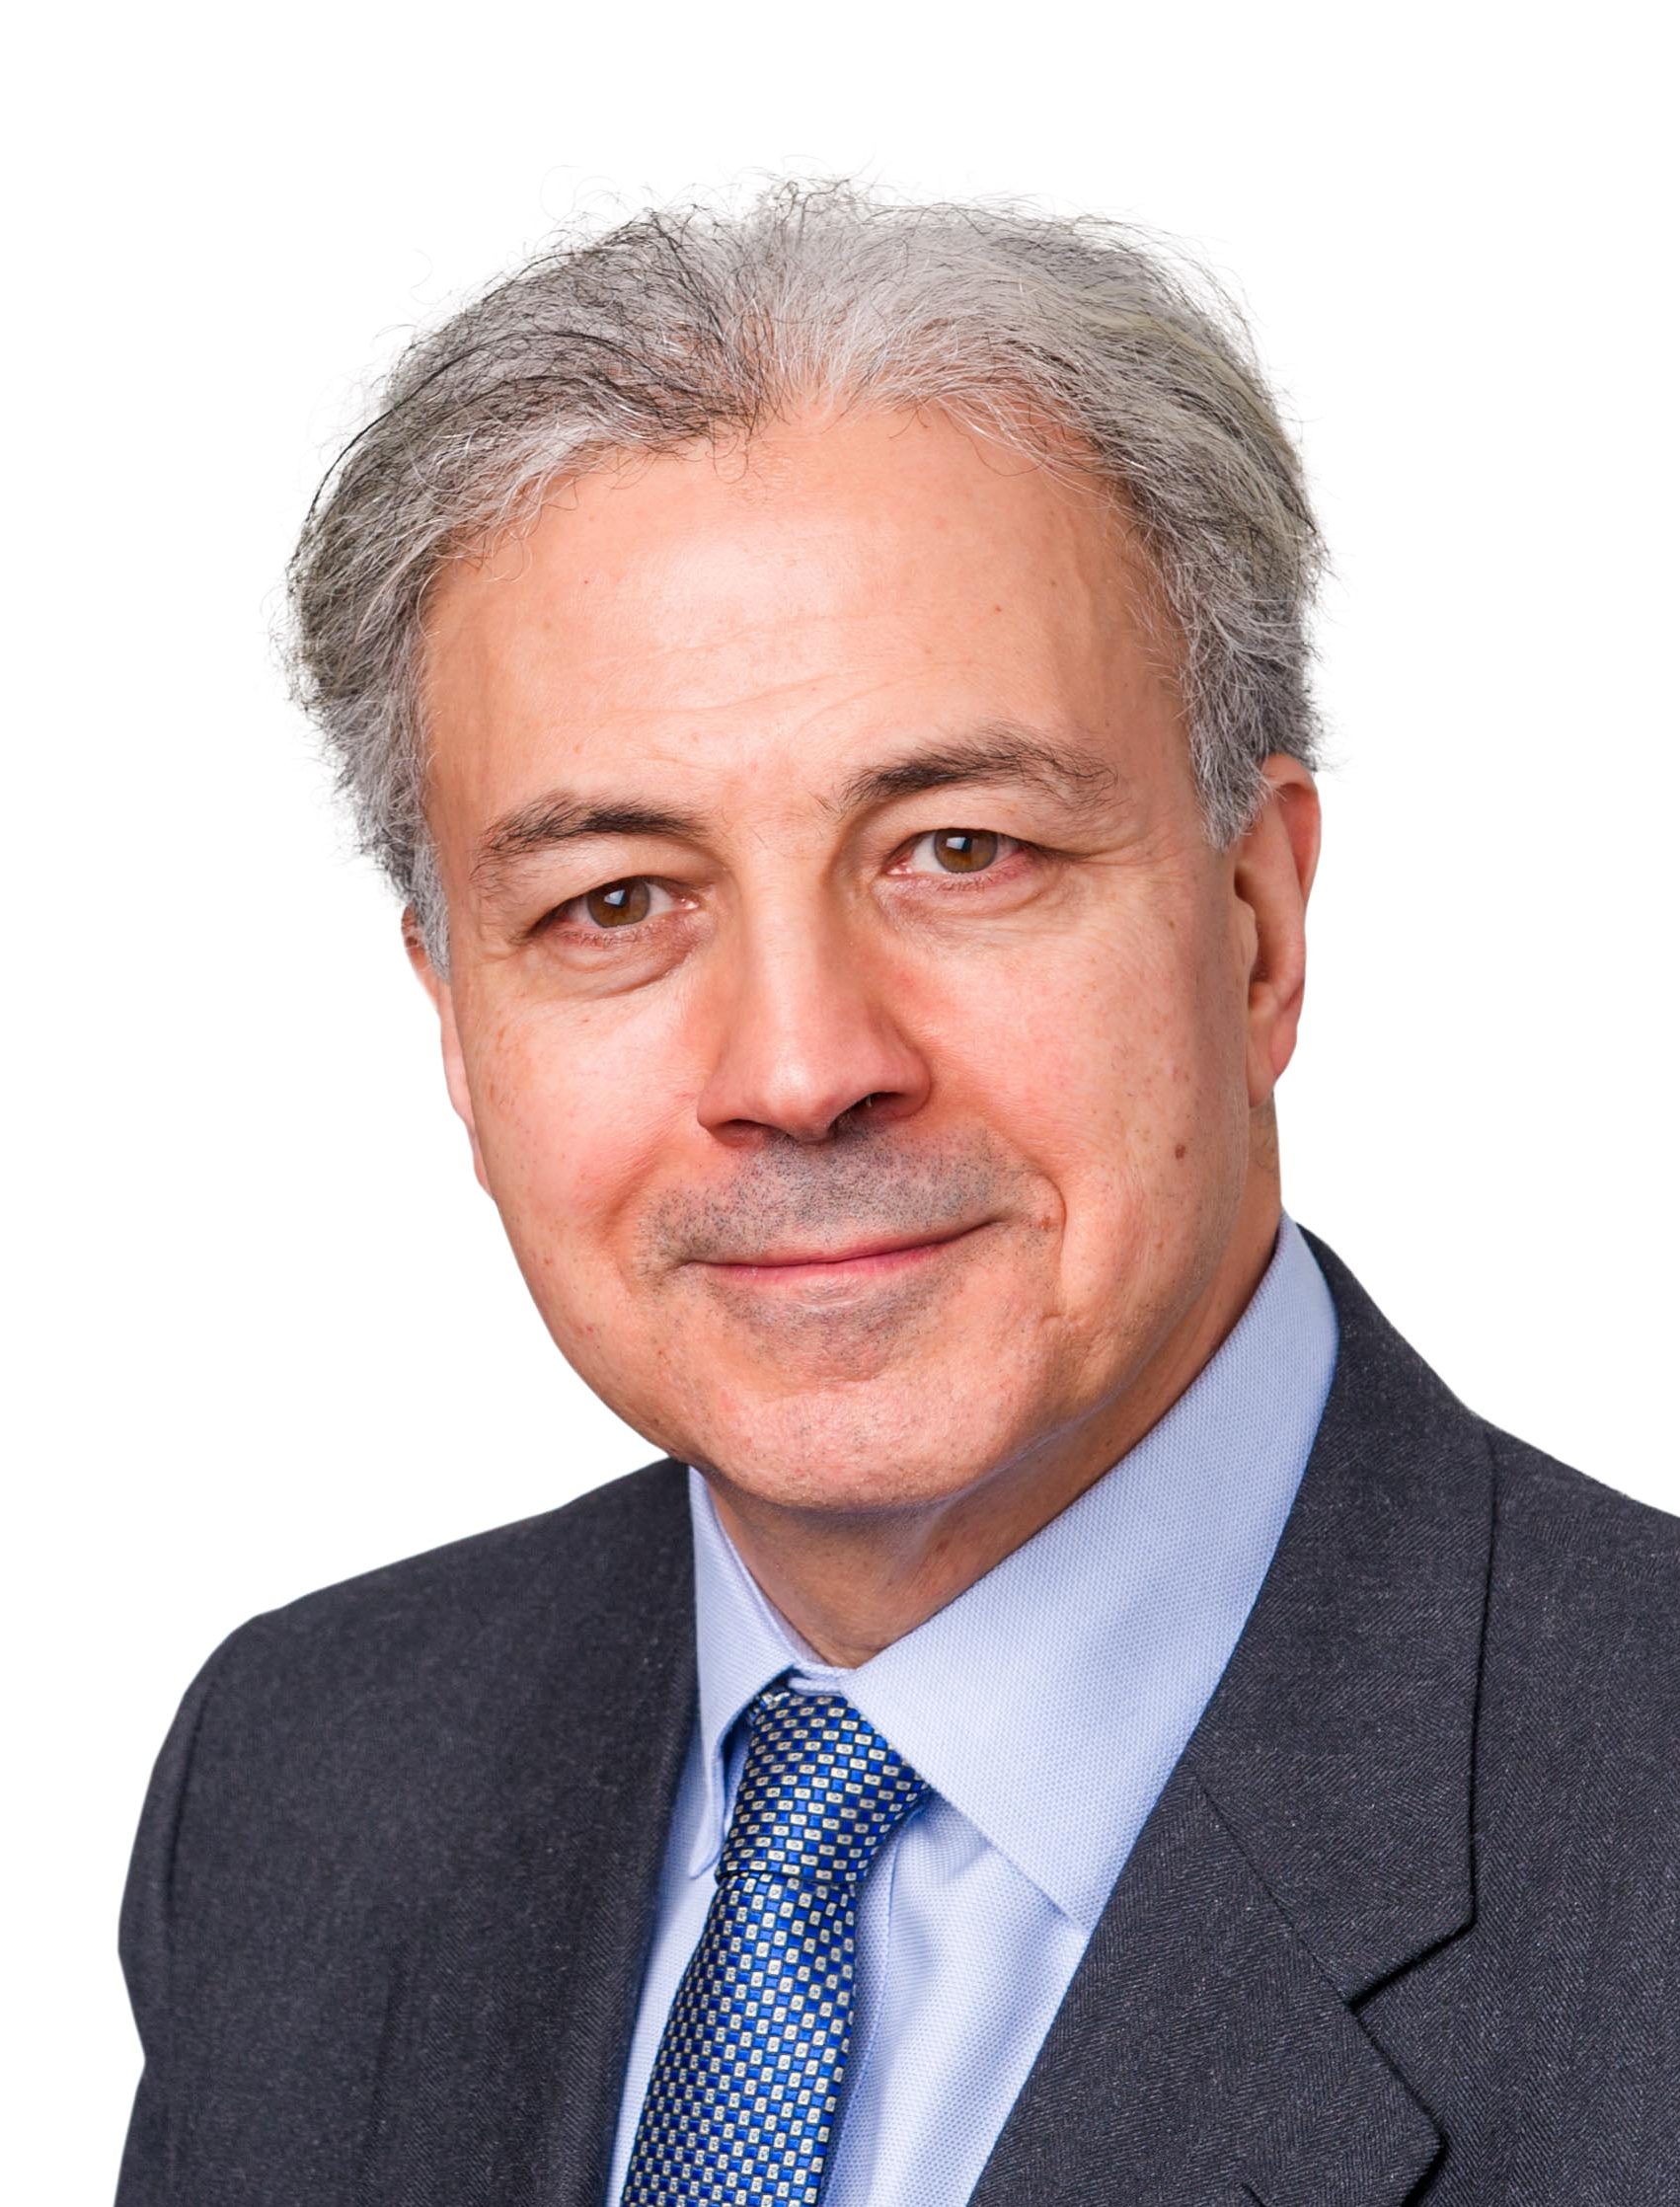 Saker Nusseibeh in a blue suit and blue tie.